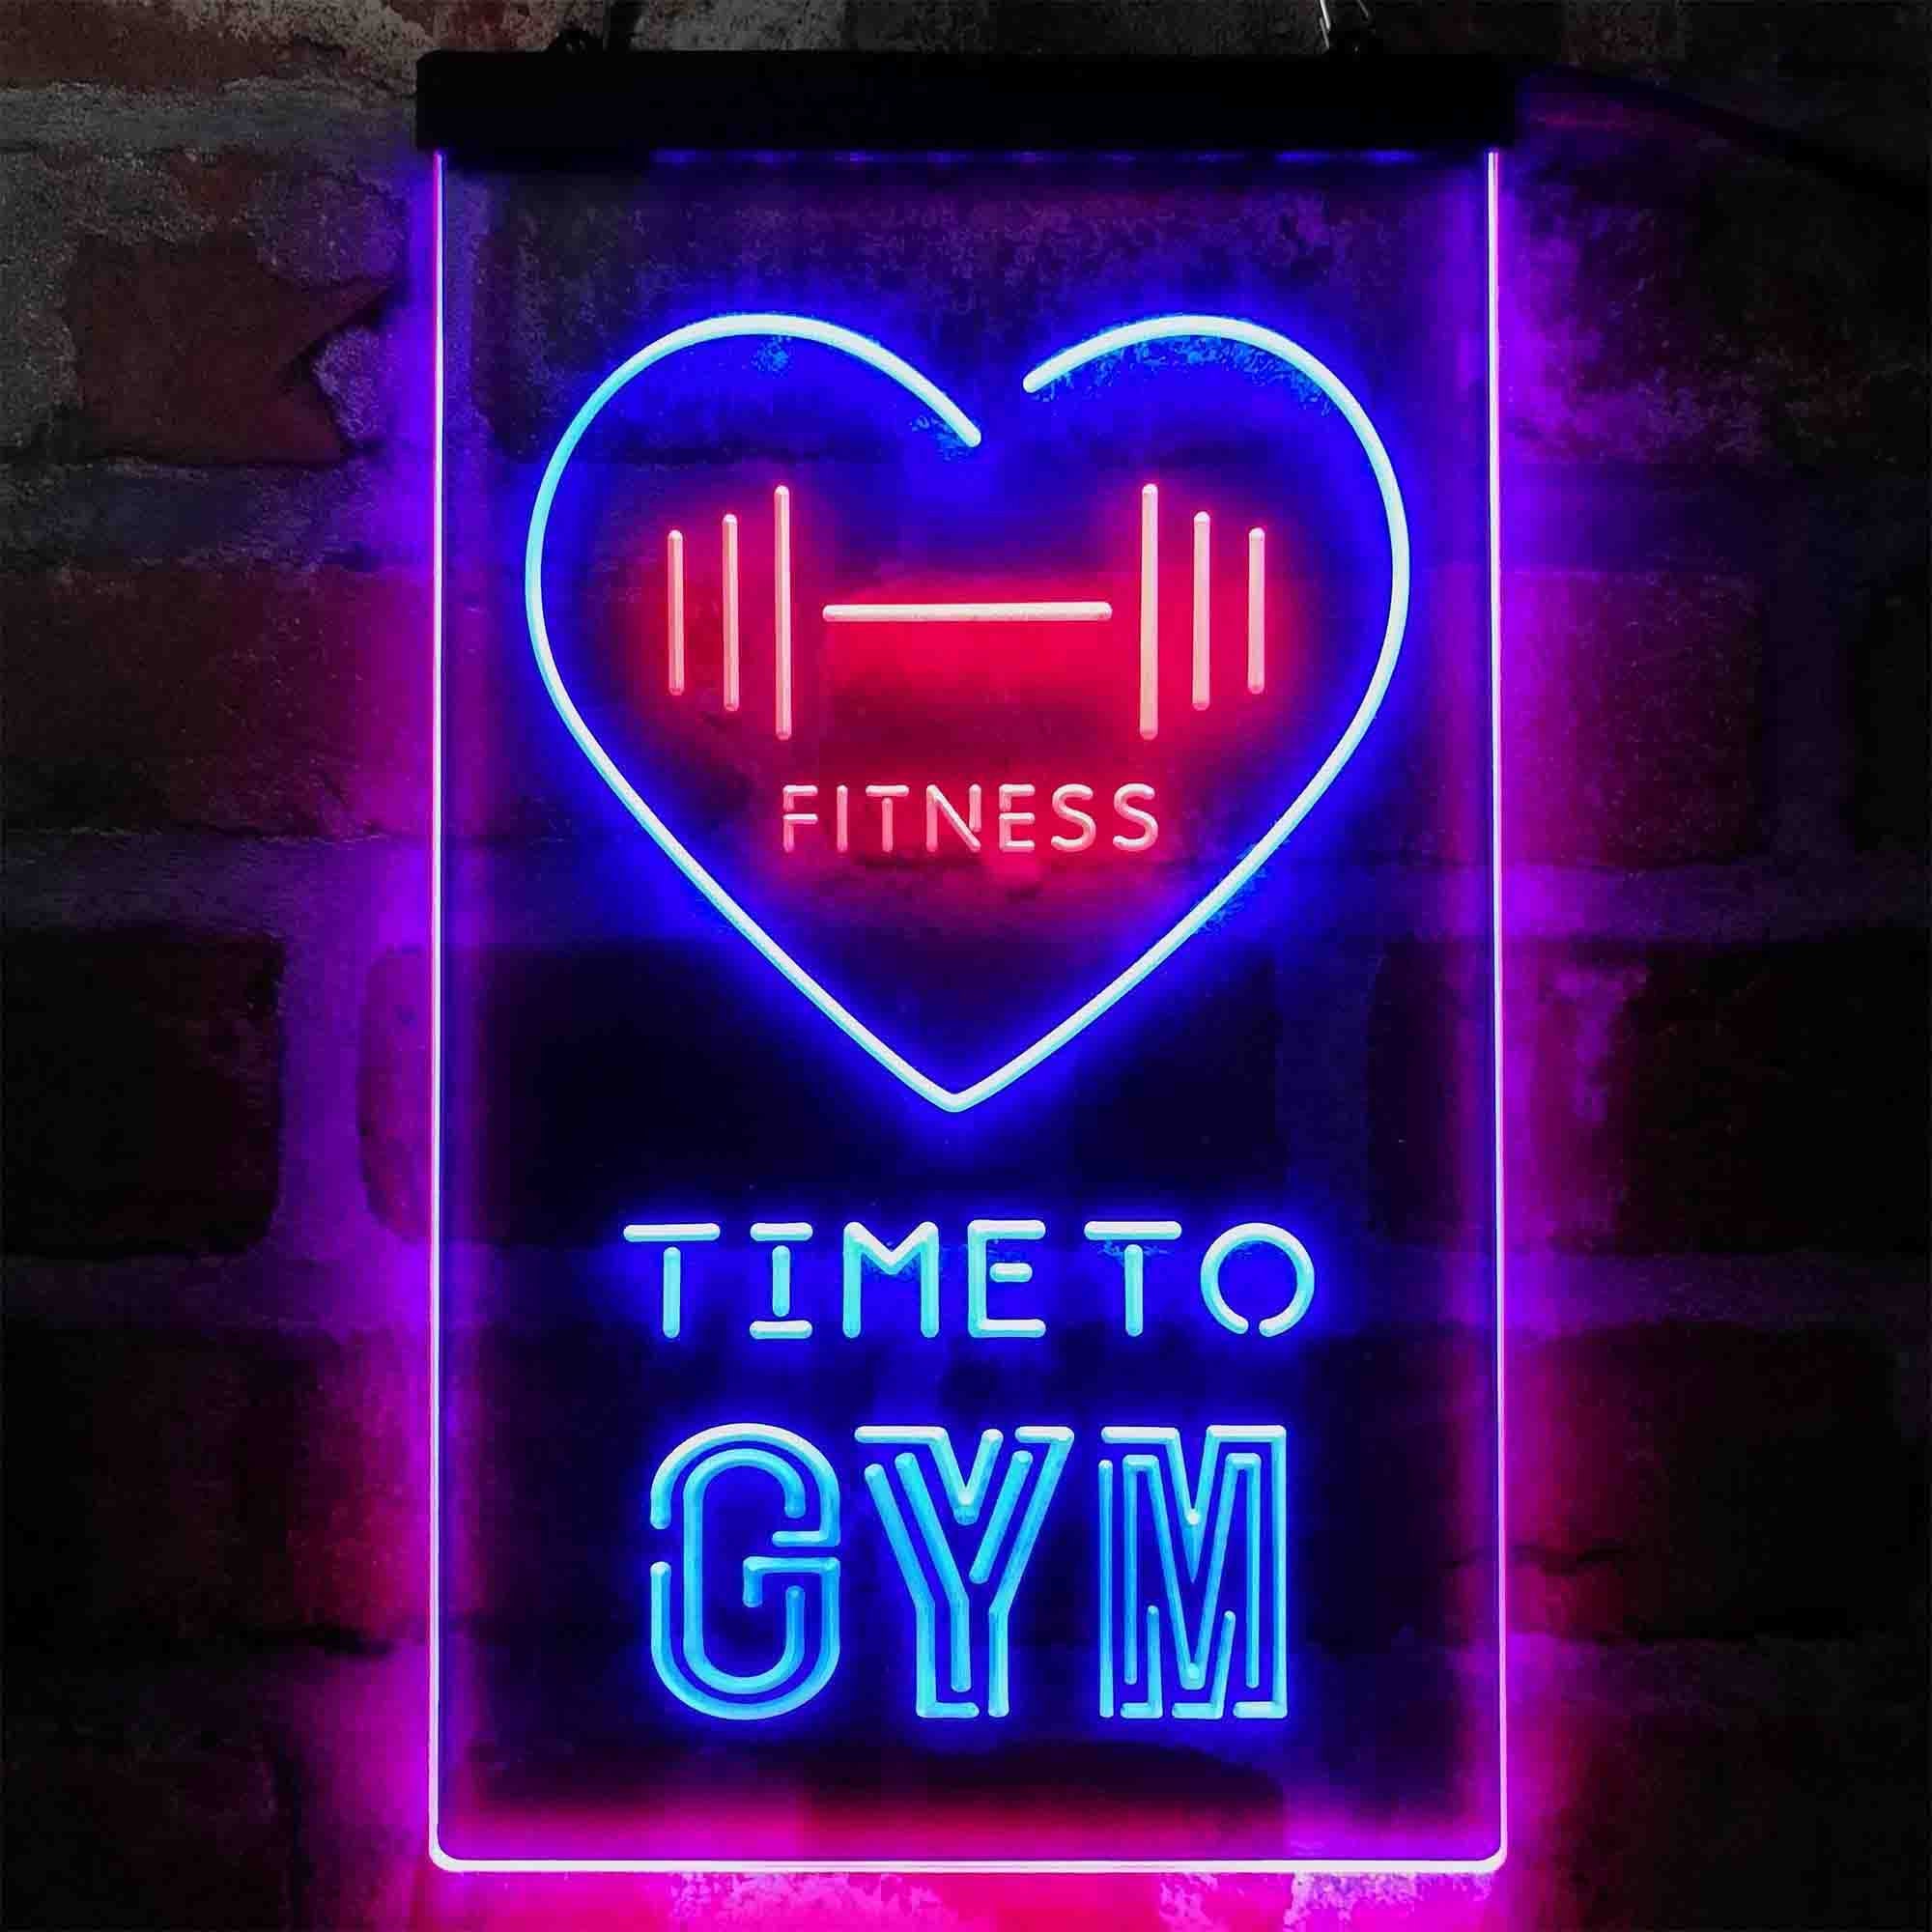 Time to Gym Fitness Club Home Dual Color LED Sign St6-i4039 | Etsy